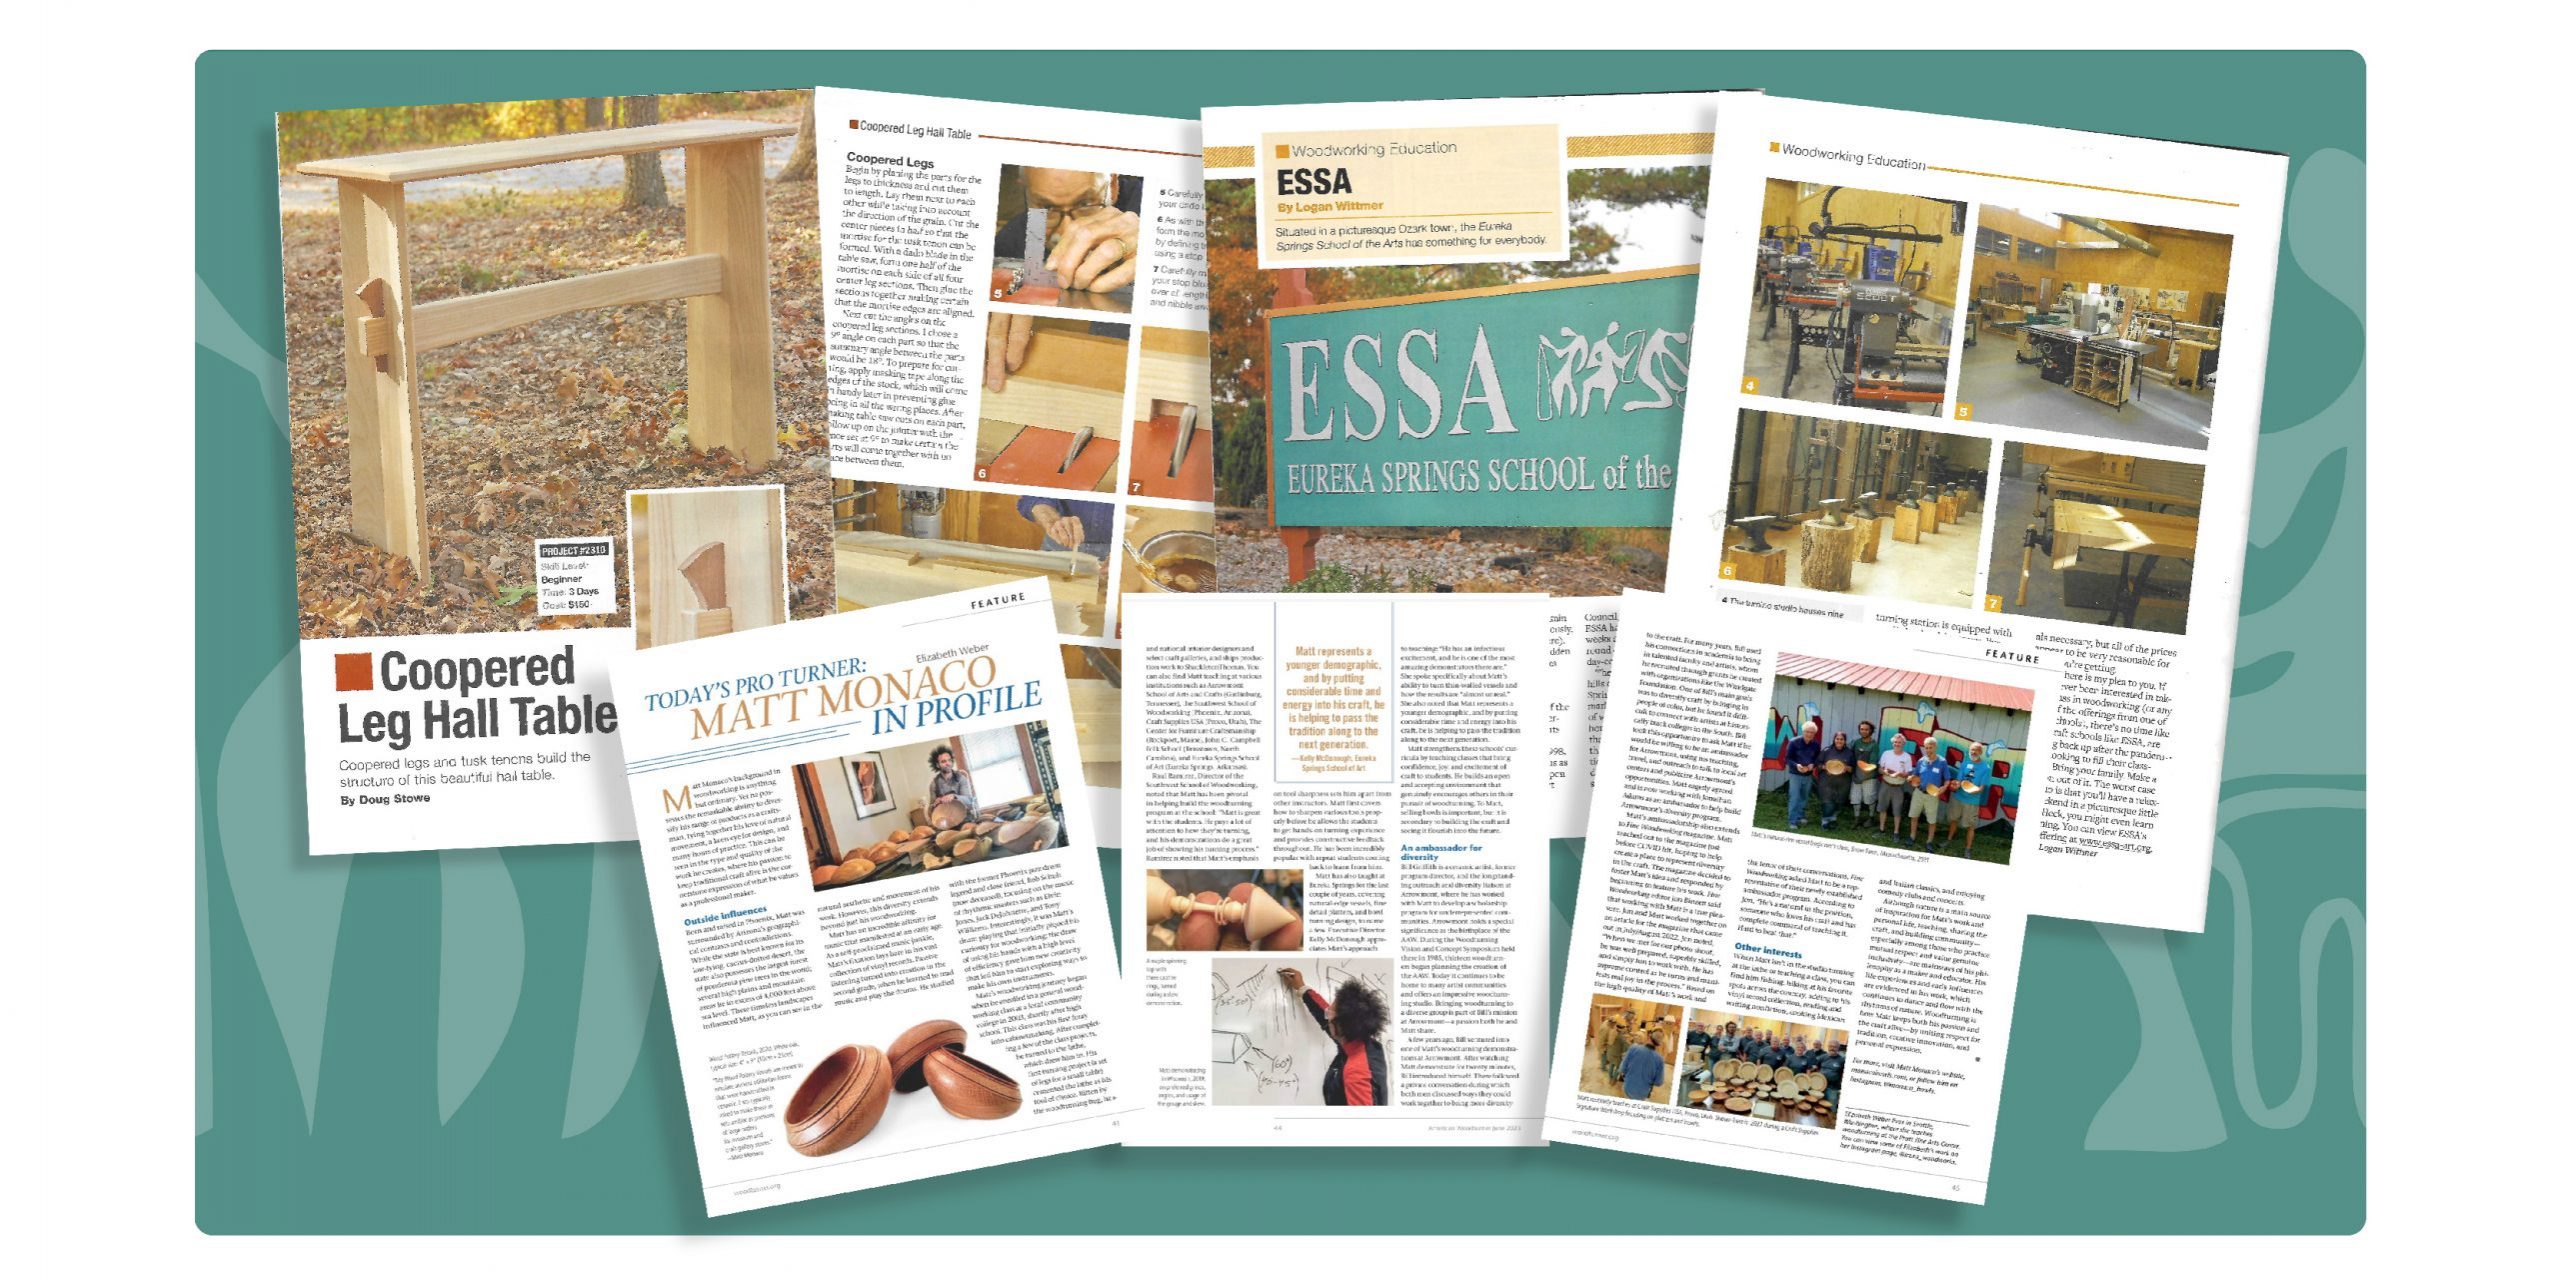 <strong>ESSA, Doug Stowe, and instructor Matt Monaco featured in June publications of Popular Woodworking Magazine and American Woodturner Magazine</strong>